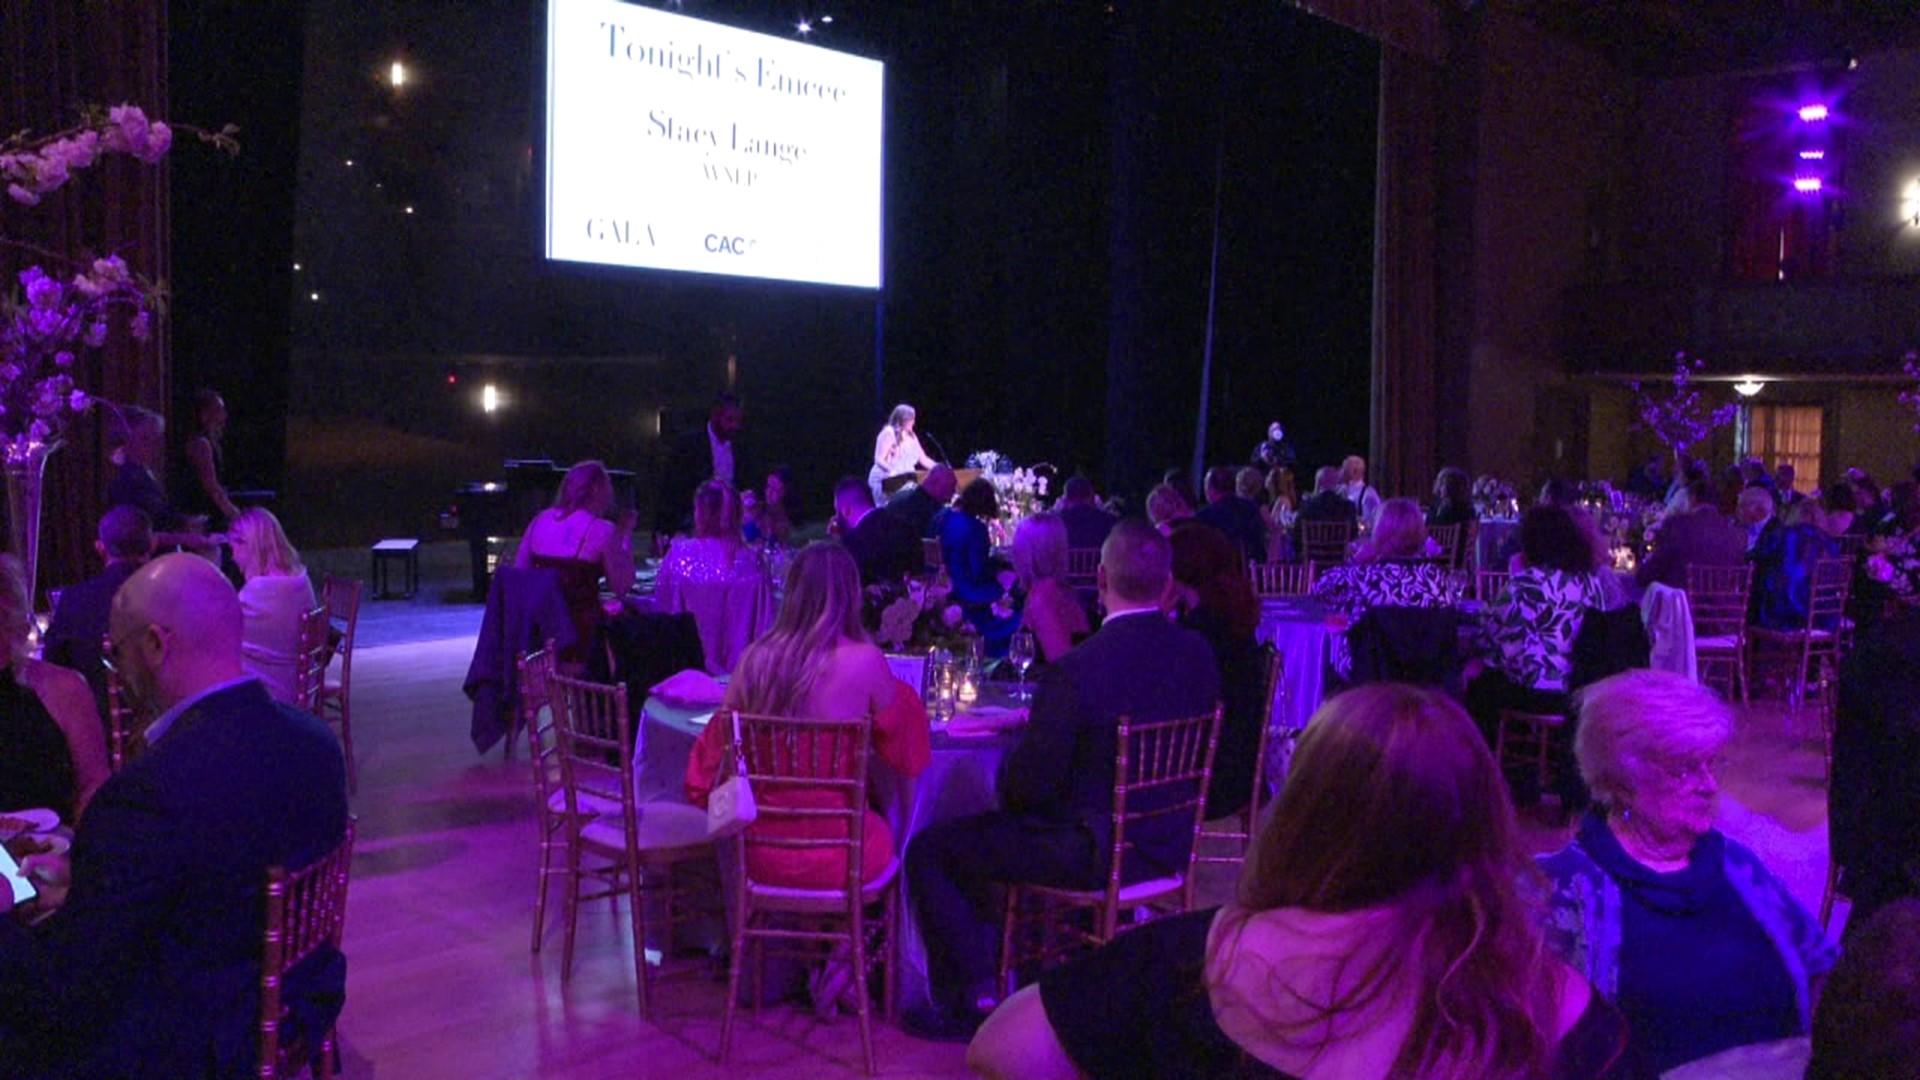 The Children's Advocacy Center of NEPA hosted its 25th anniversary "Silver Screen Gala" at the Scranton Cultural Center on Thursday.